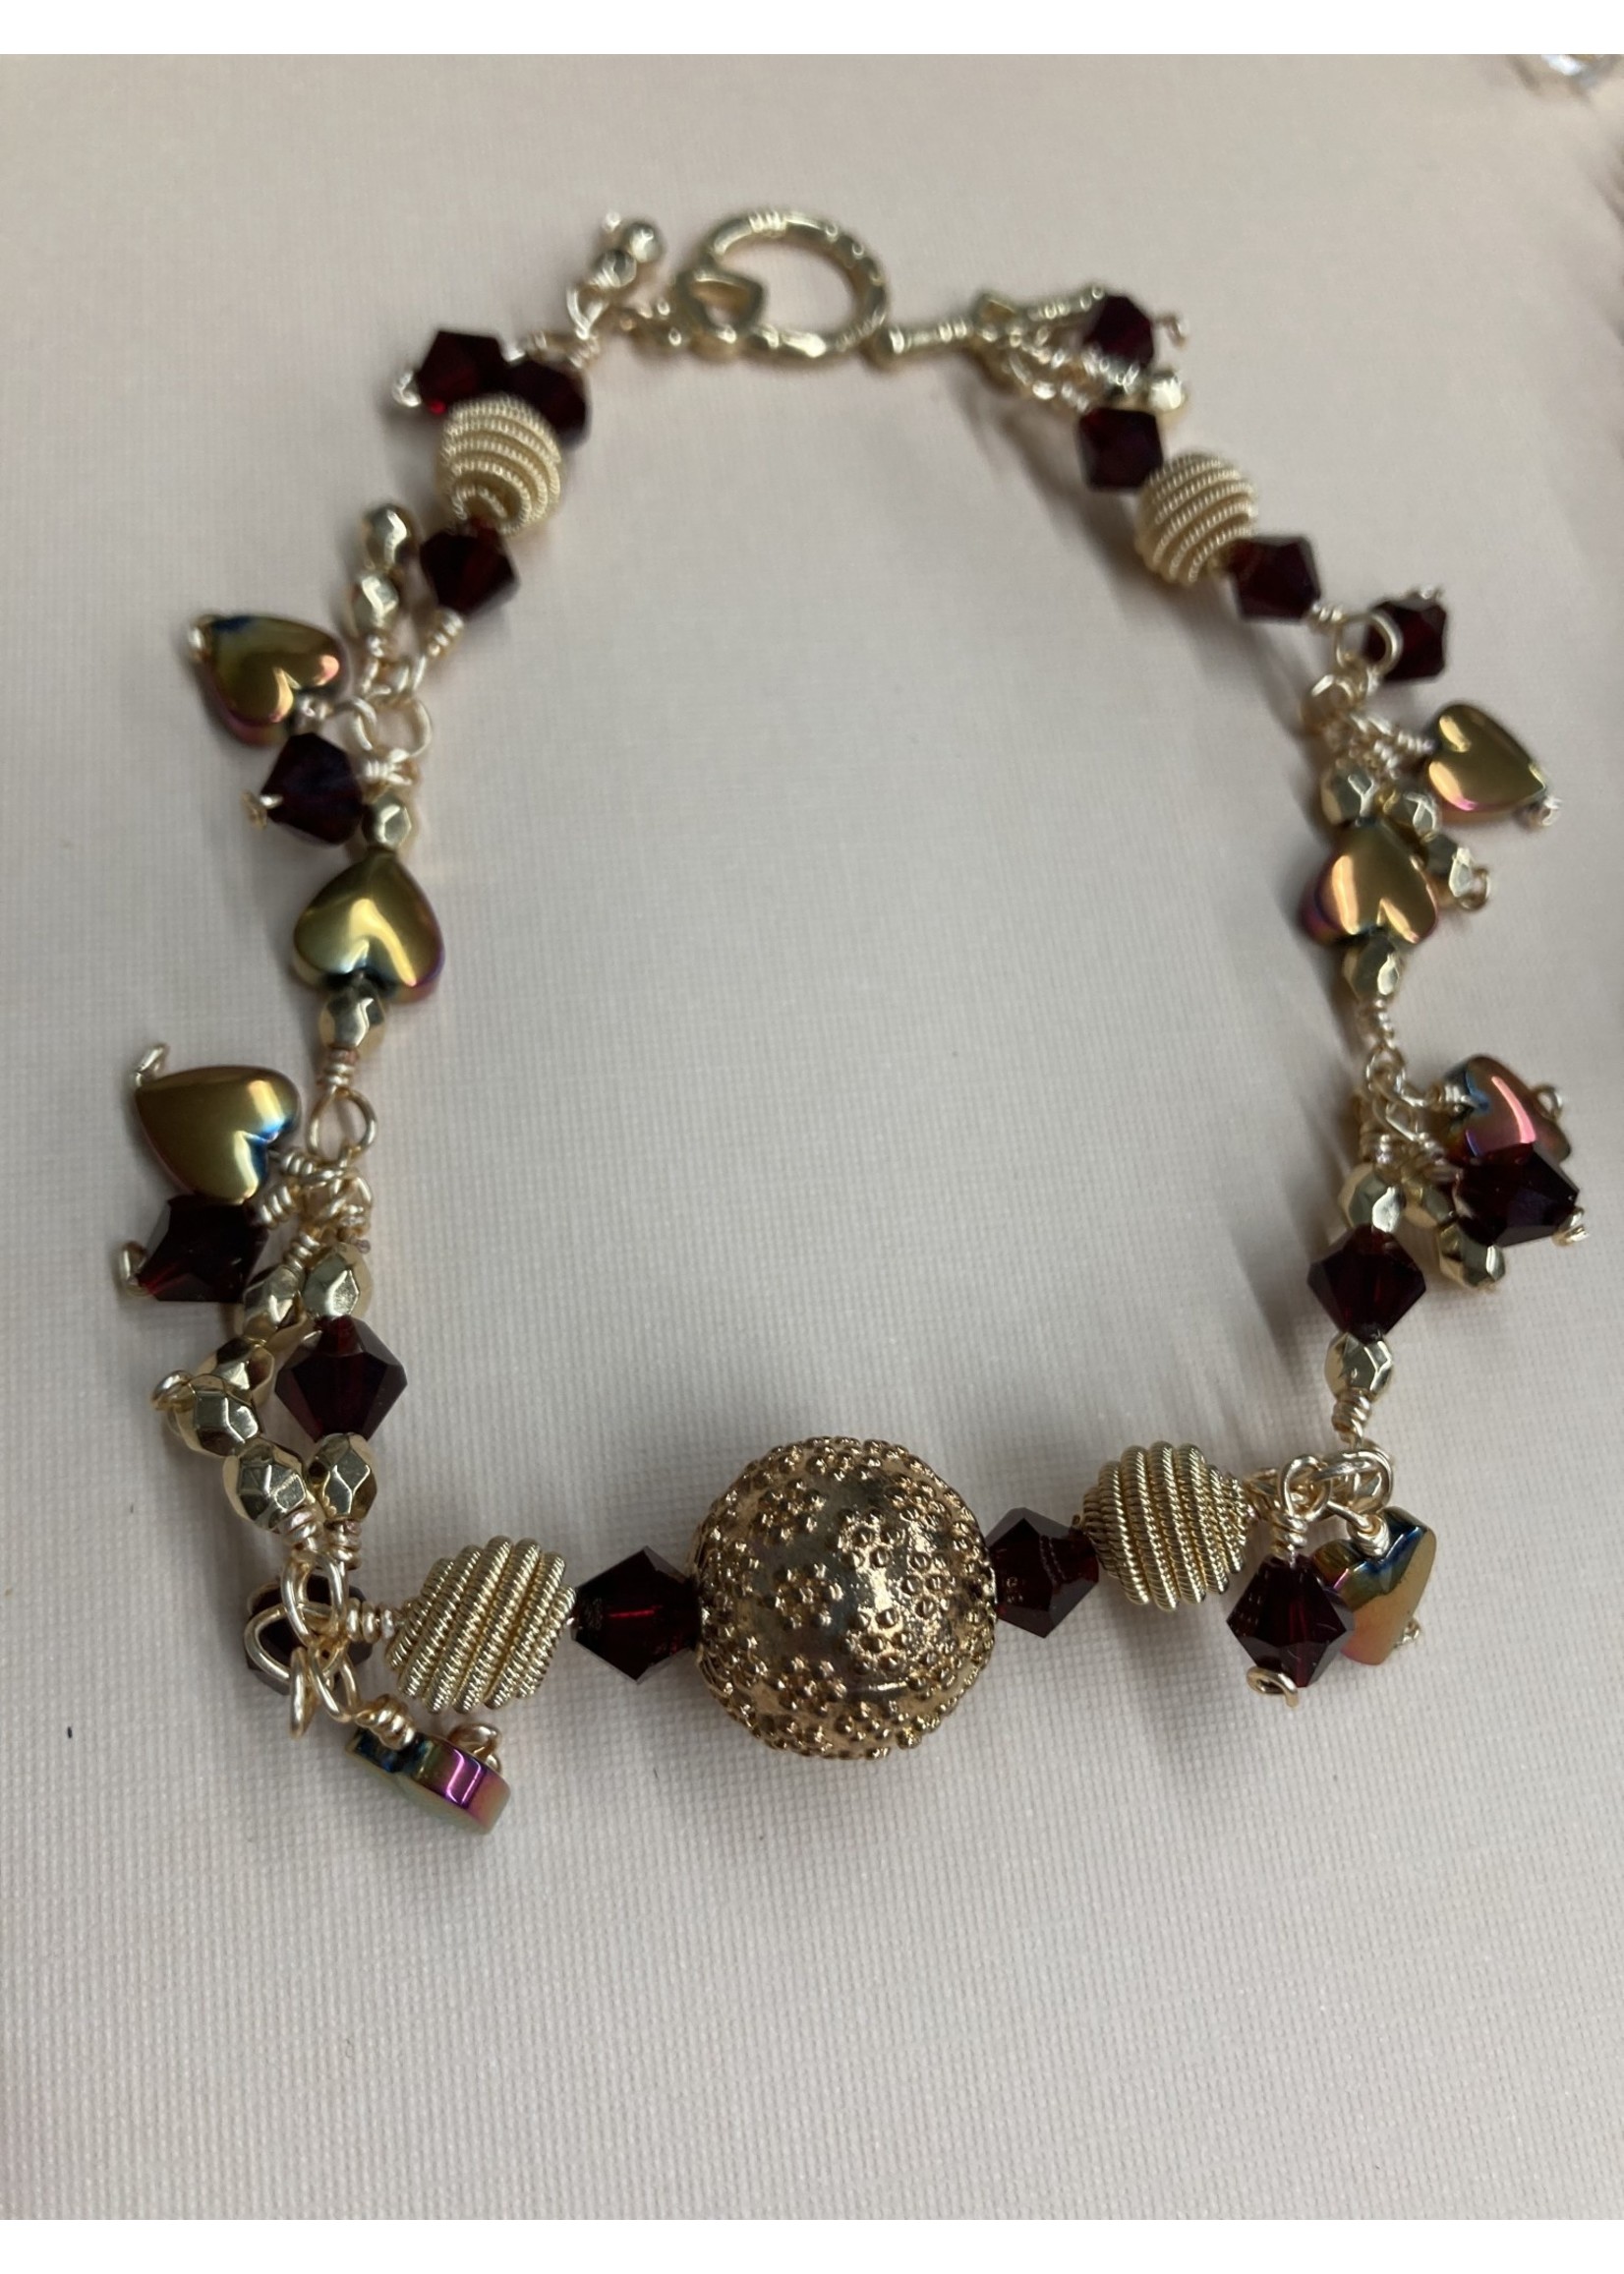 Our Twisted Dahlia BES101 Burgundy Crystals Gold Spiral Beads and Iridescent Metallic Hearts Earrings and Bracelet